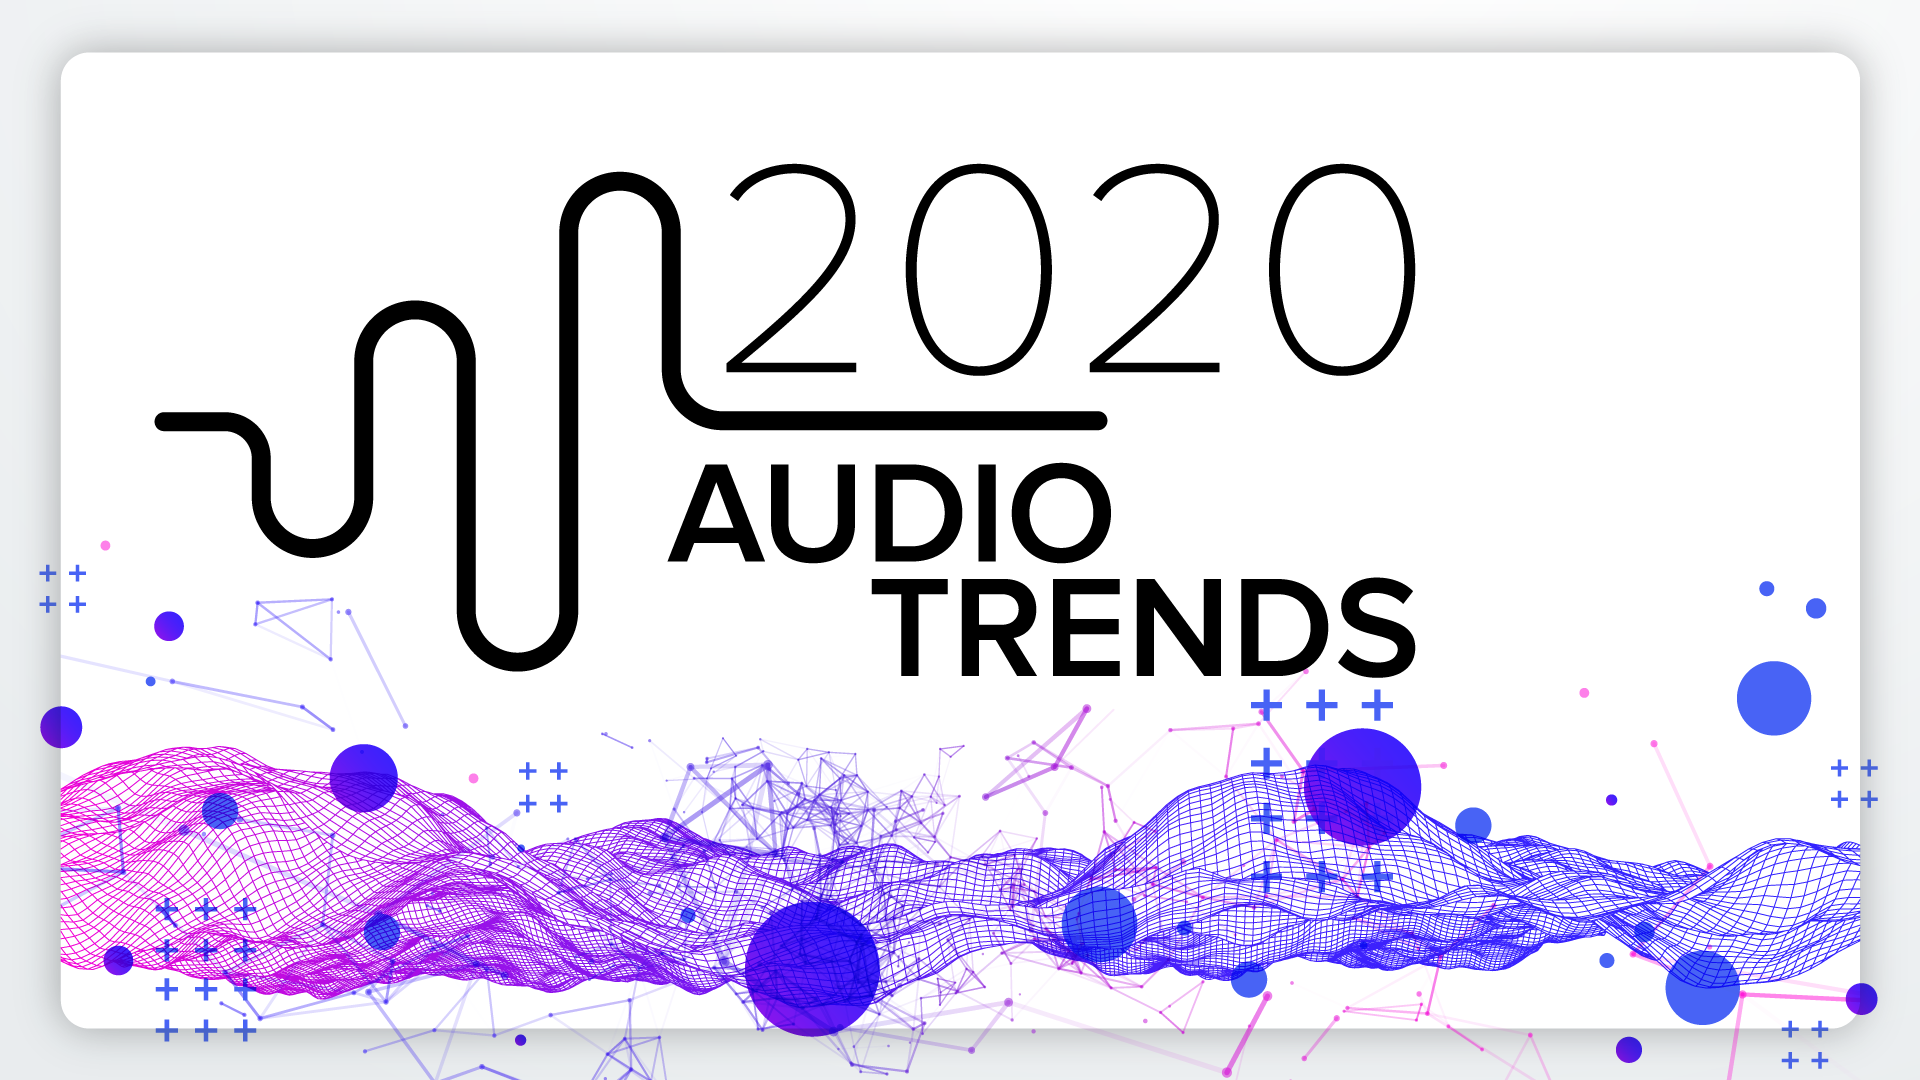 Audio trends for 2020